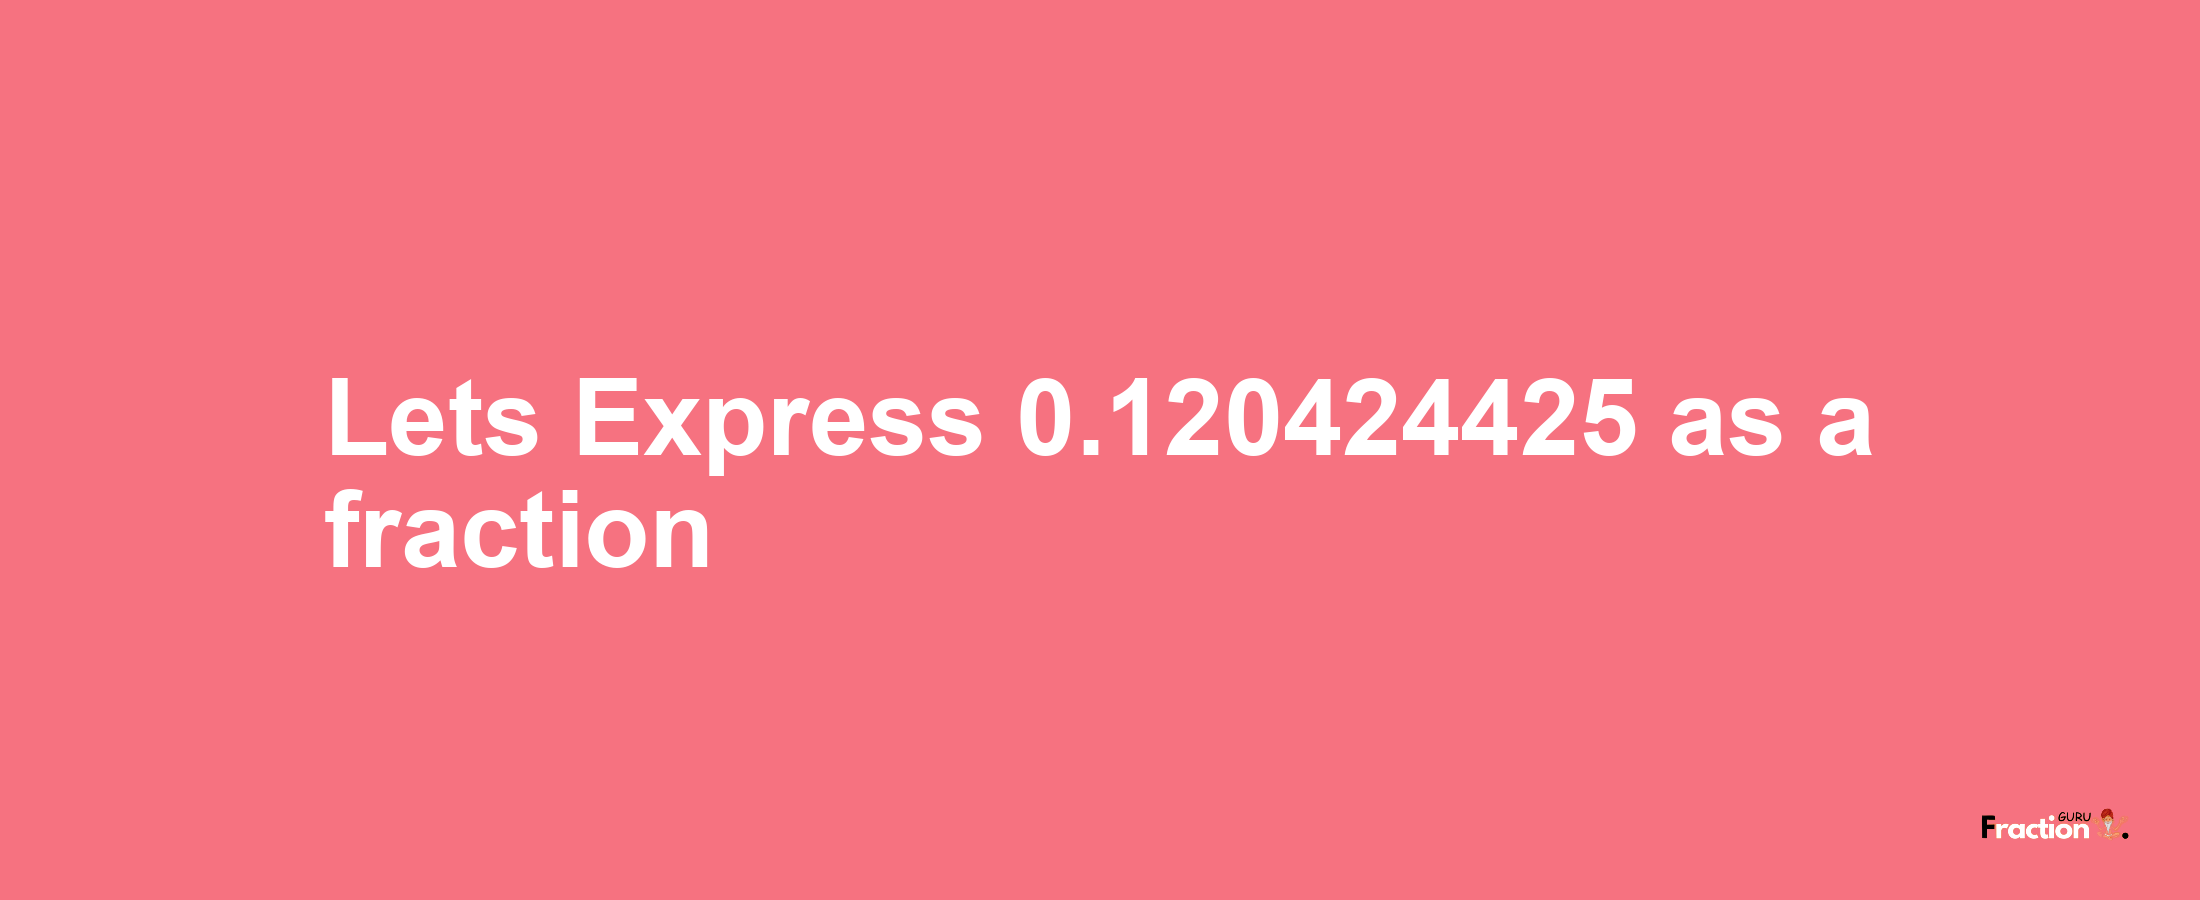 Lets Express 0.120424425 as afraction